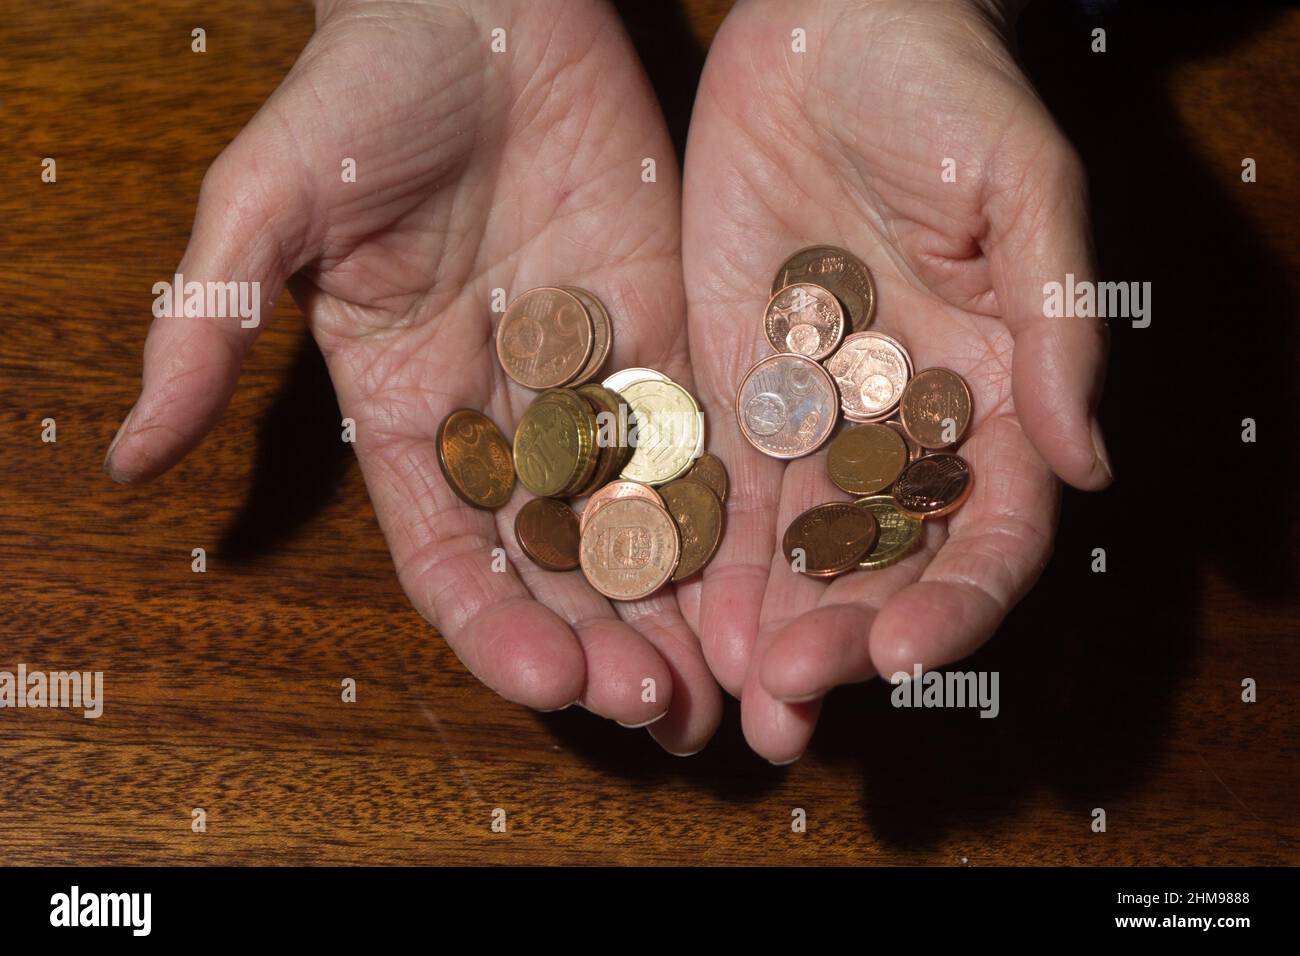 Wrinkled hands of elderly woman holding coins. Stock Photo